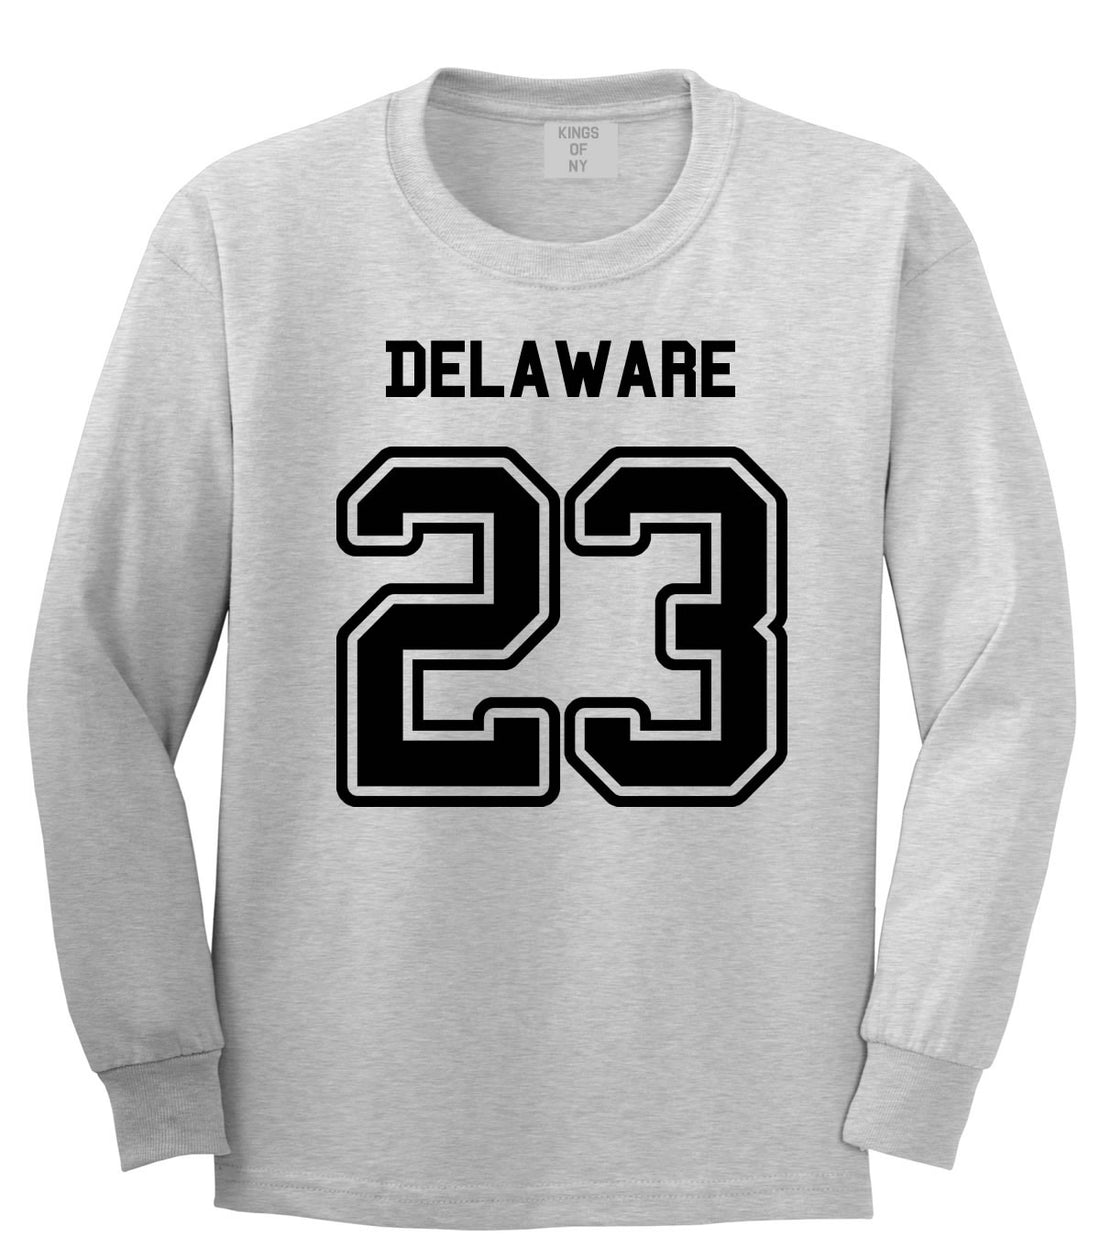 Sport Style Delaware 23 Team State Jersey Long Sleeve T-Shirt By Kings Of NY